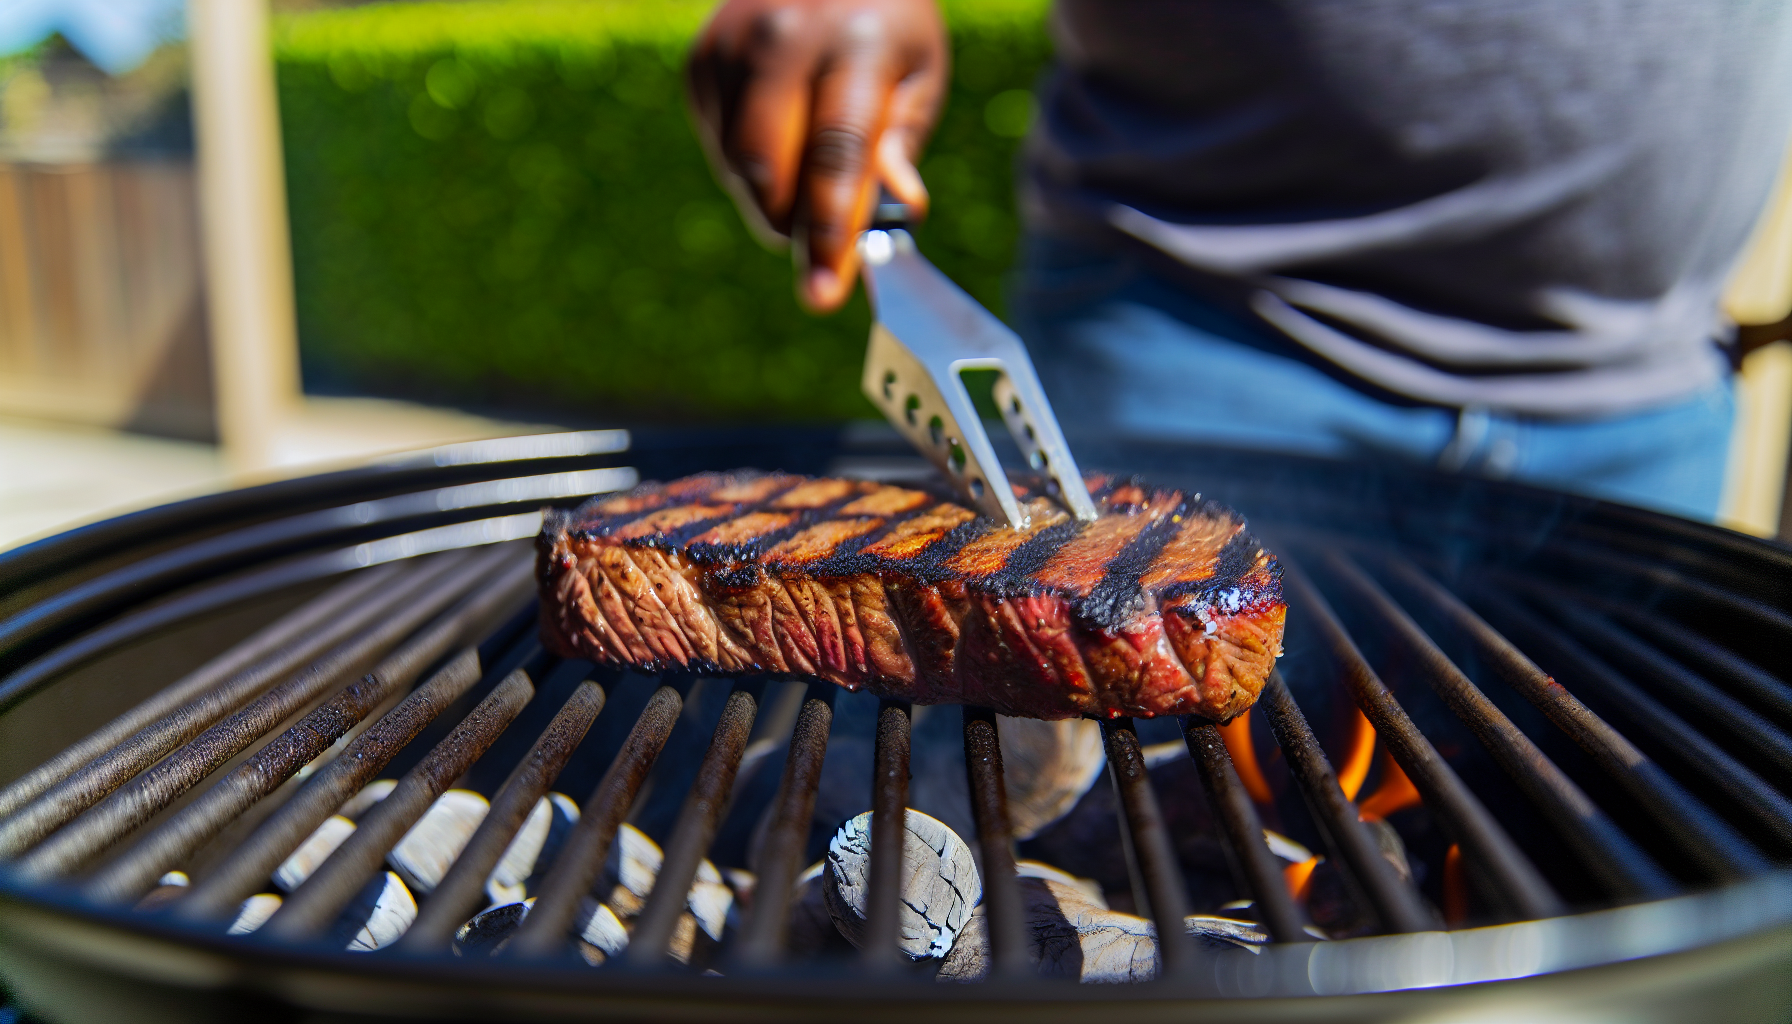 Flank steak sizzling on a grill